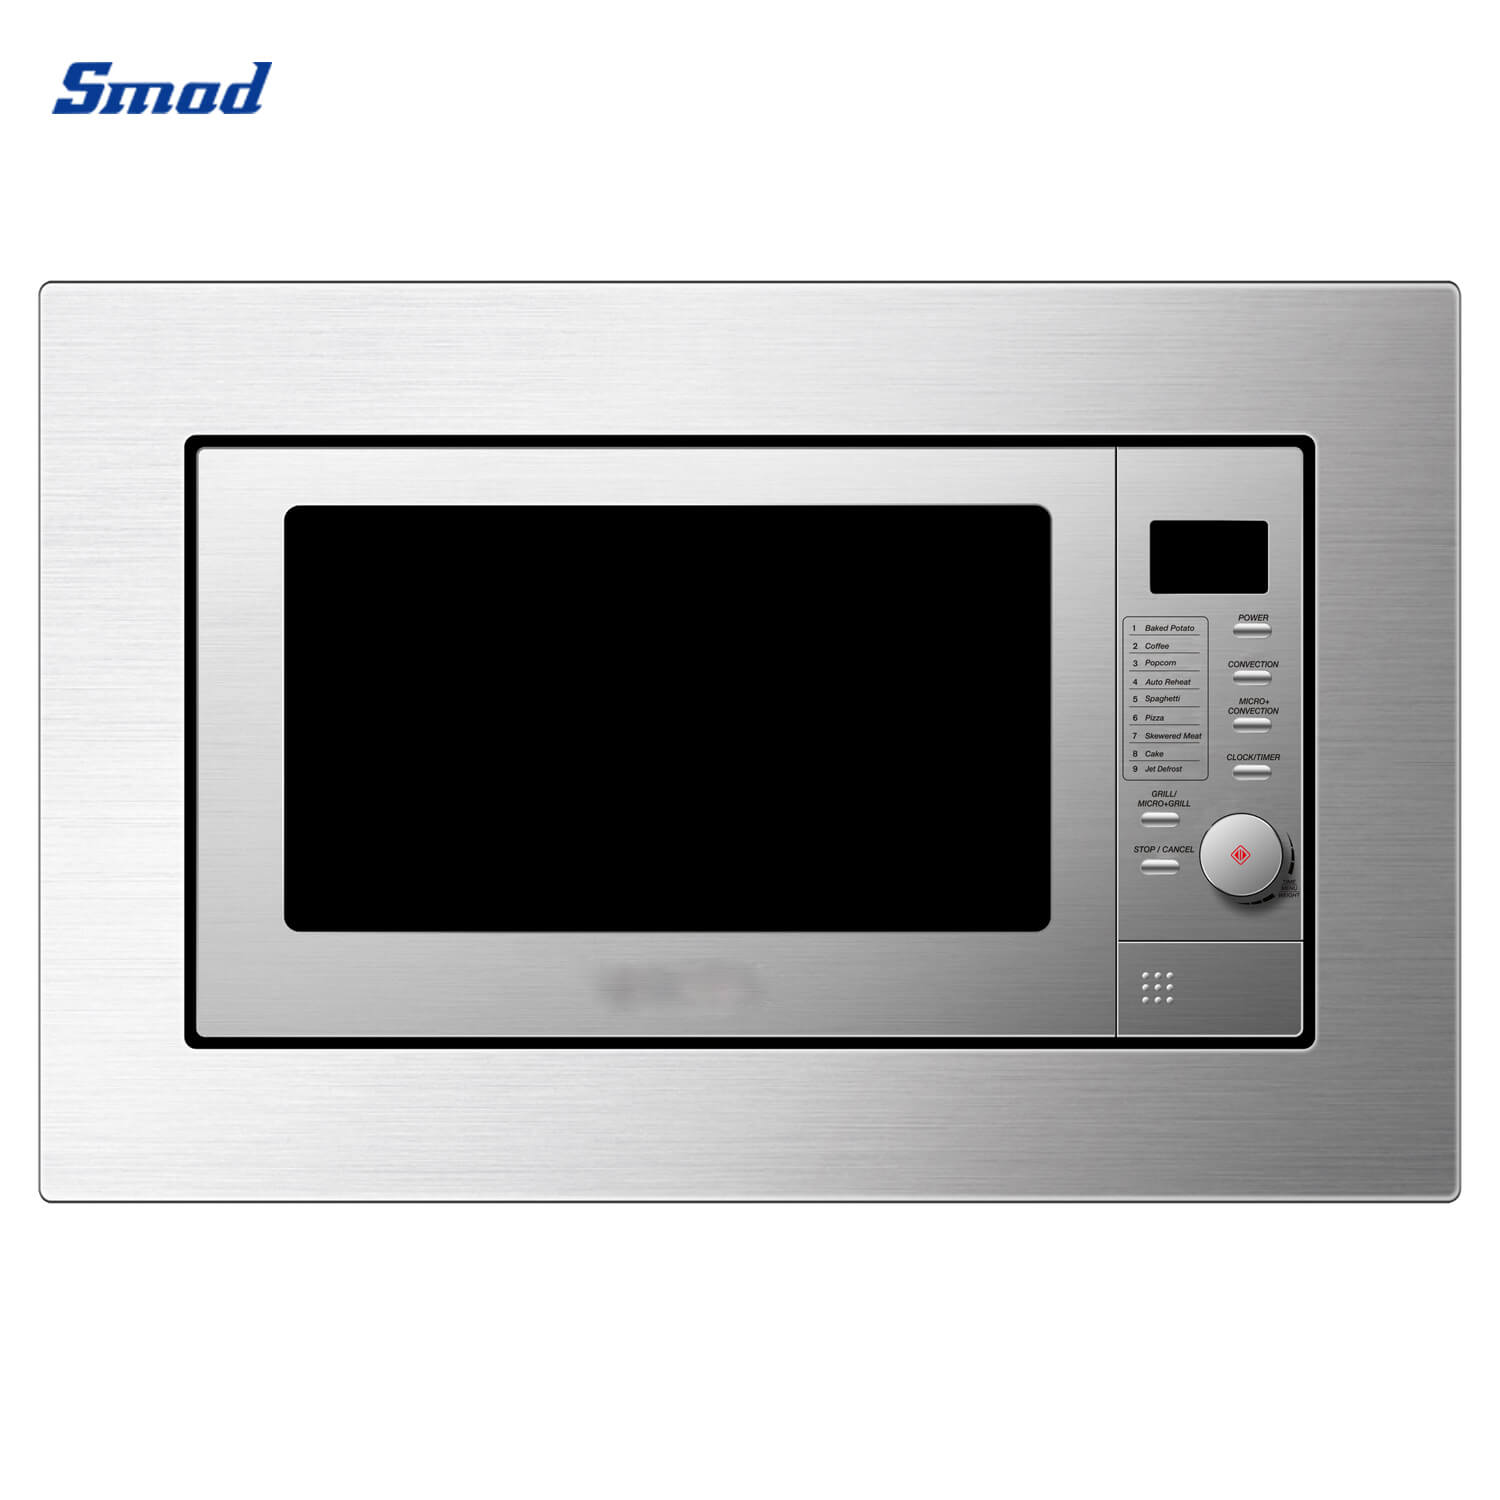 Smad 20L 700W Stainless Steel Built In Microwave Oven with Grill